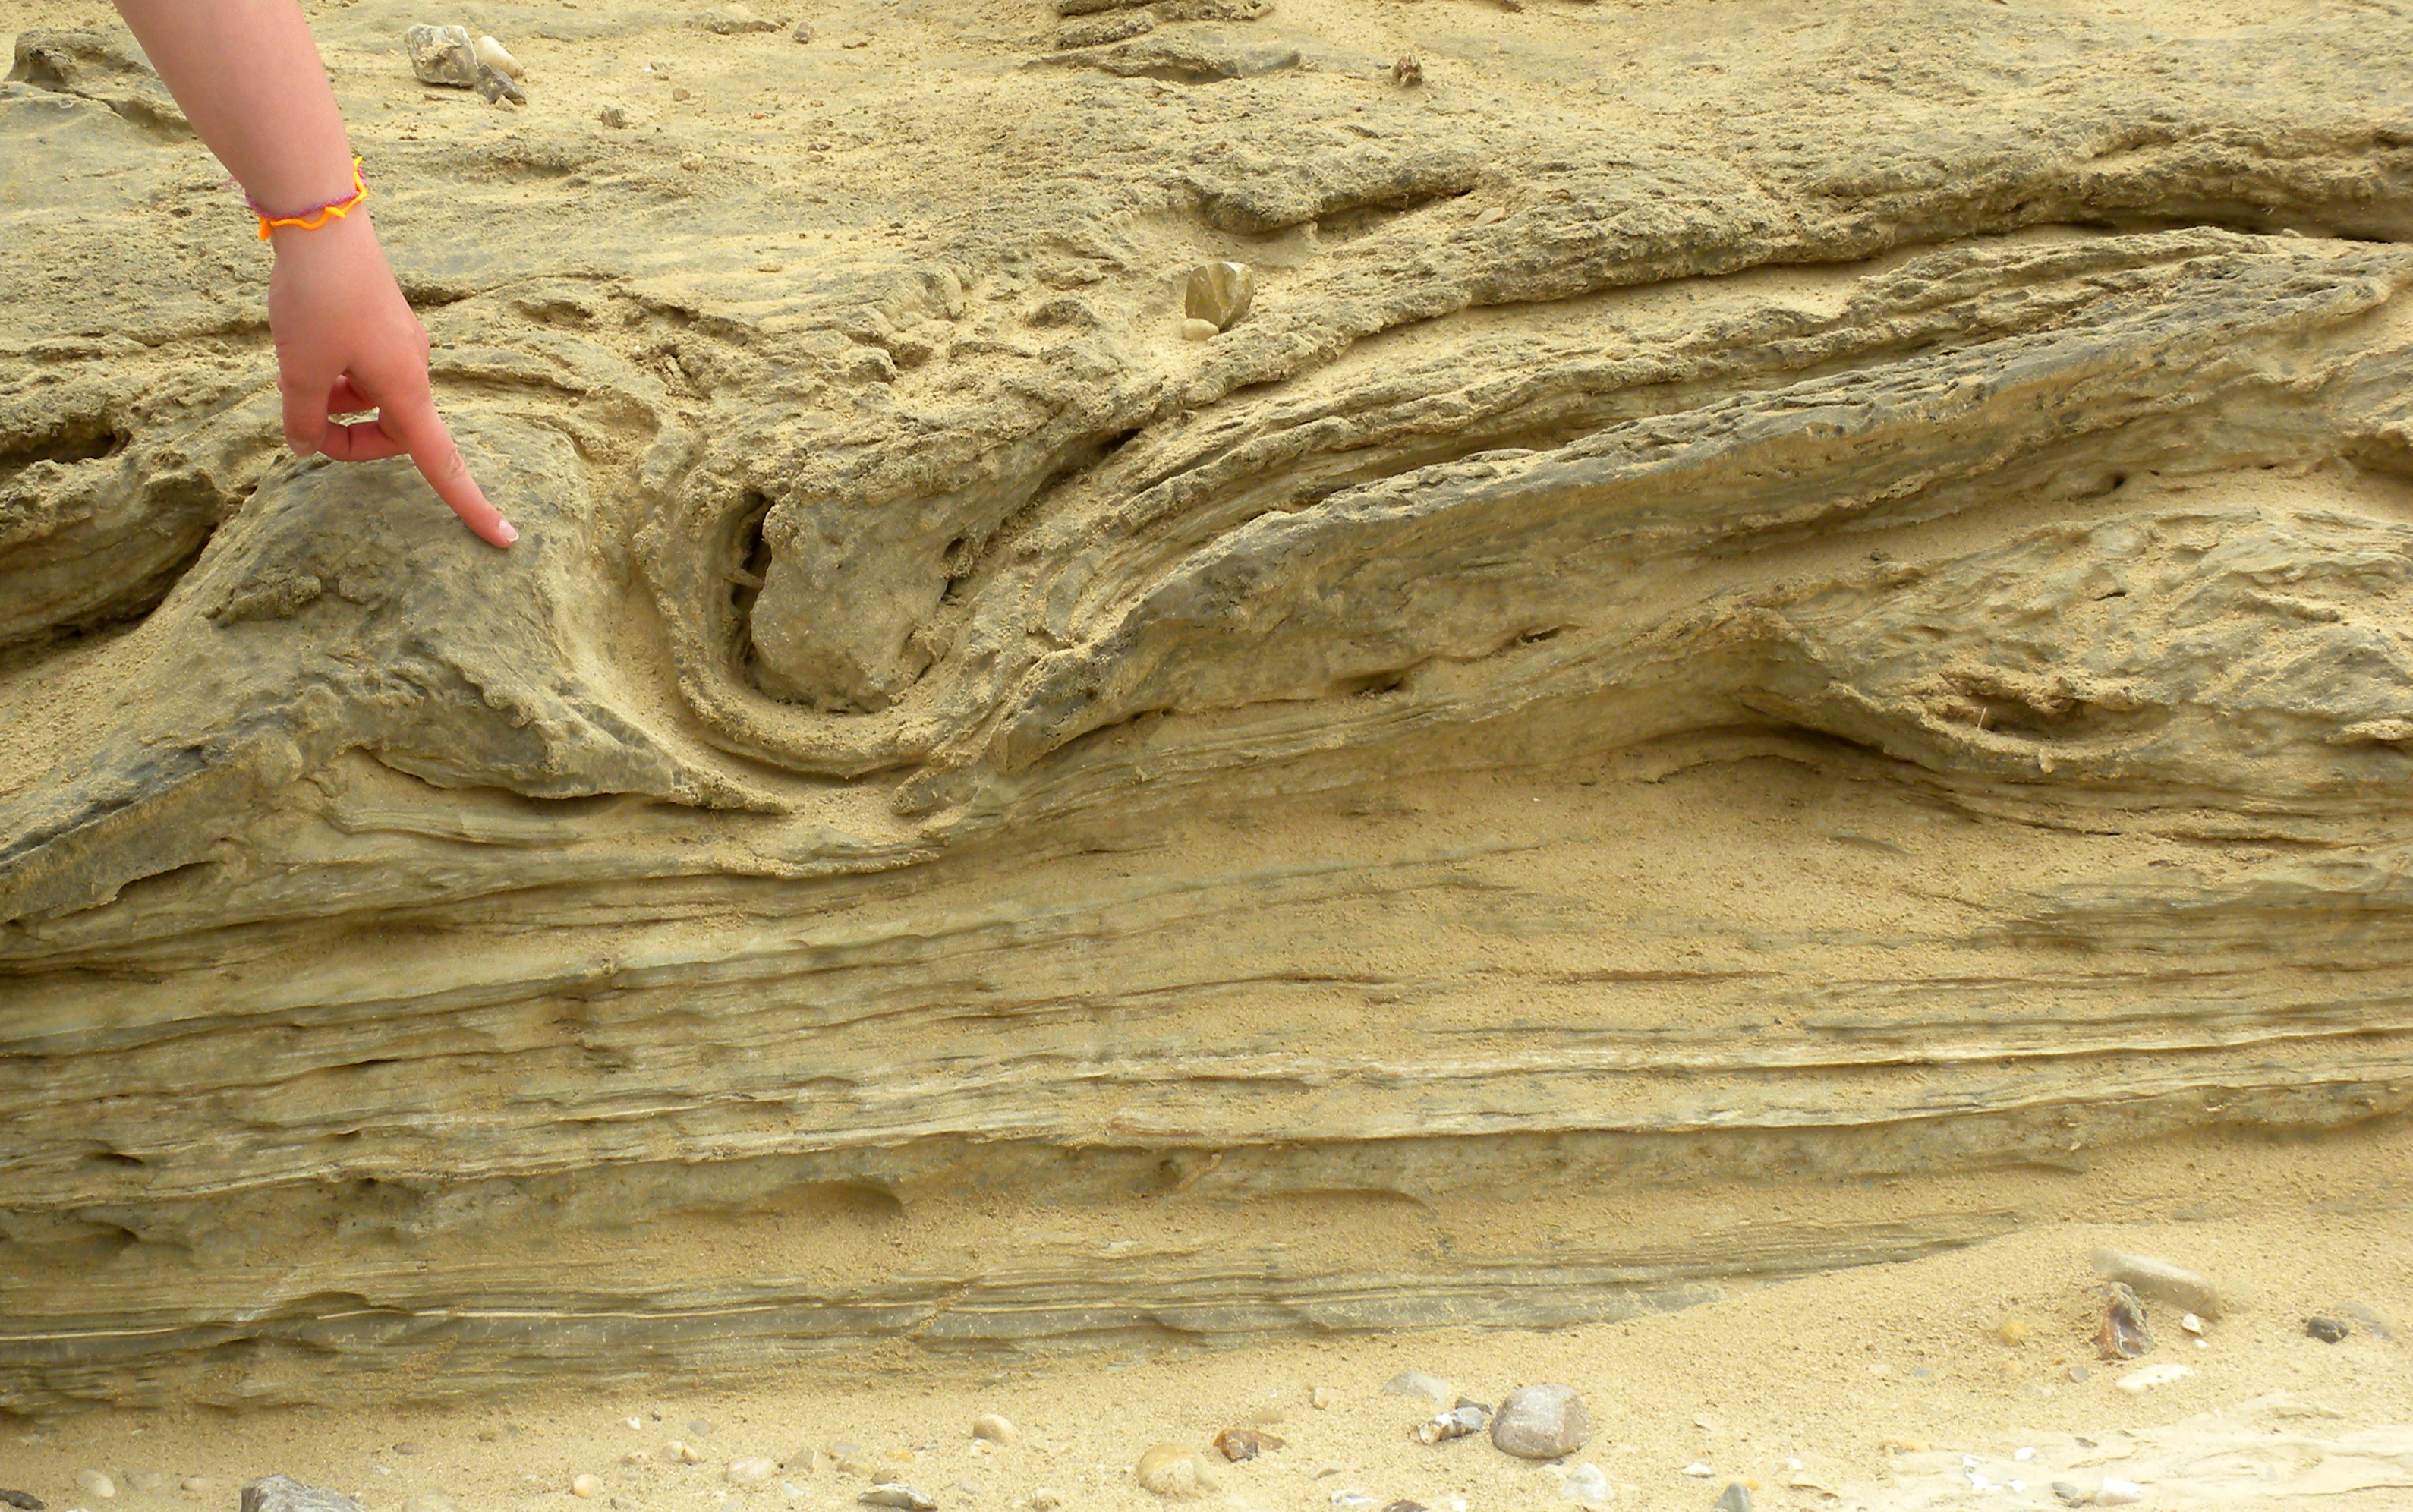 A soft sediment deformation feature in Dead Sea sediments, Israel.